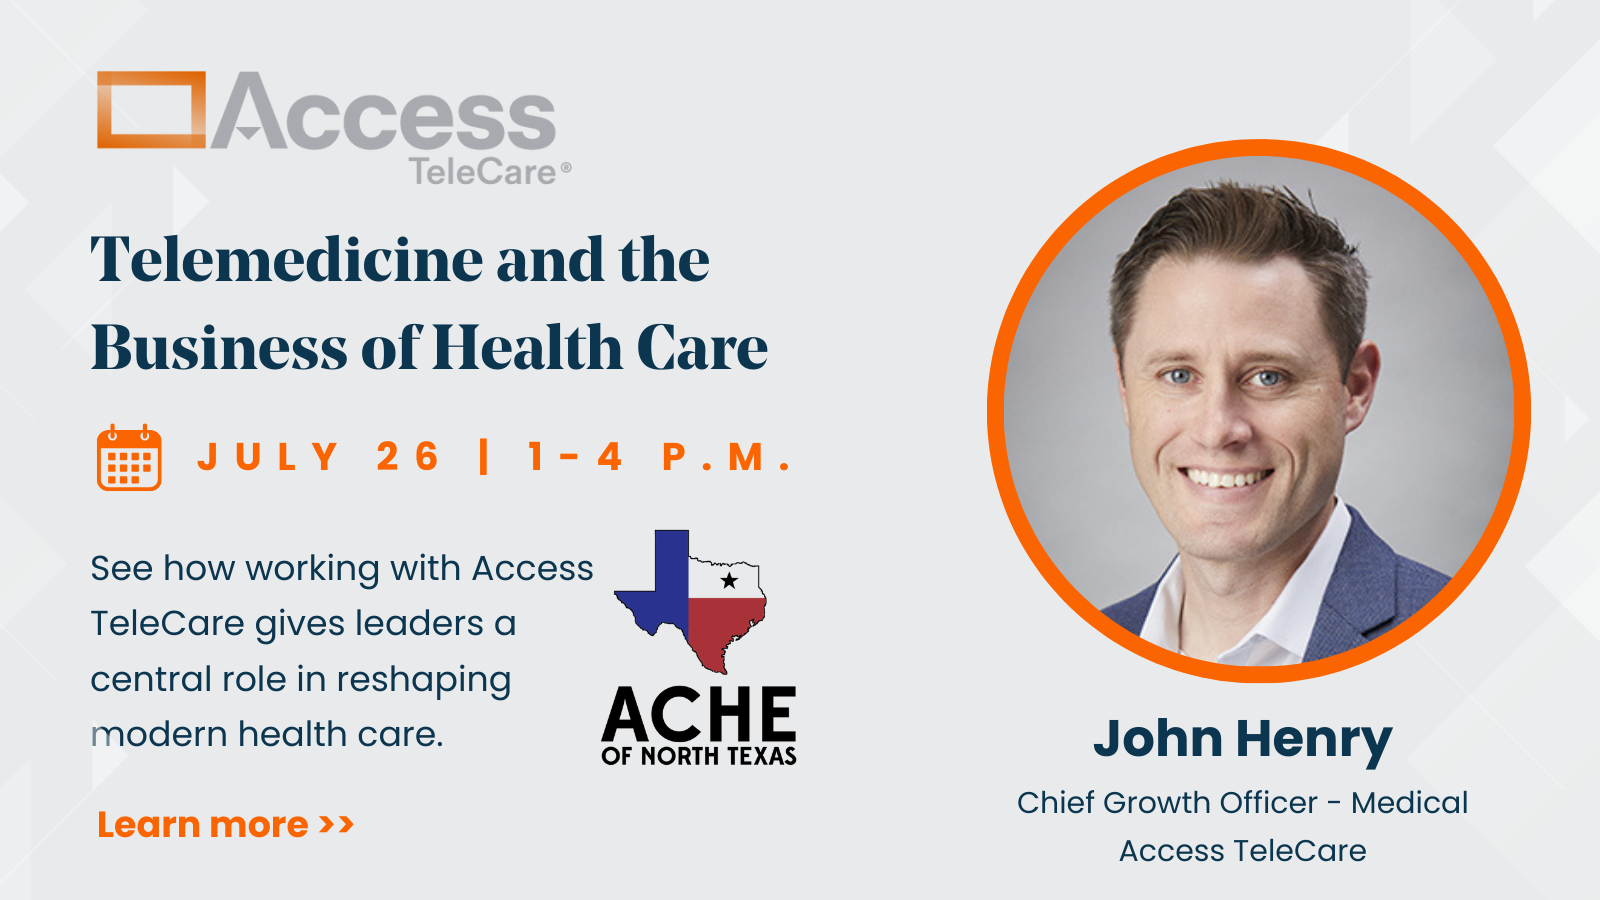 Access TeleCare Chief Growth Officer - Medical, John Henry, to speak at ACHE of North Texas event